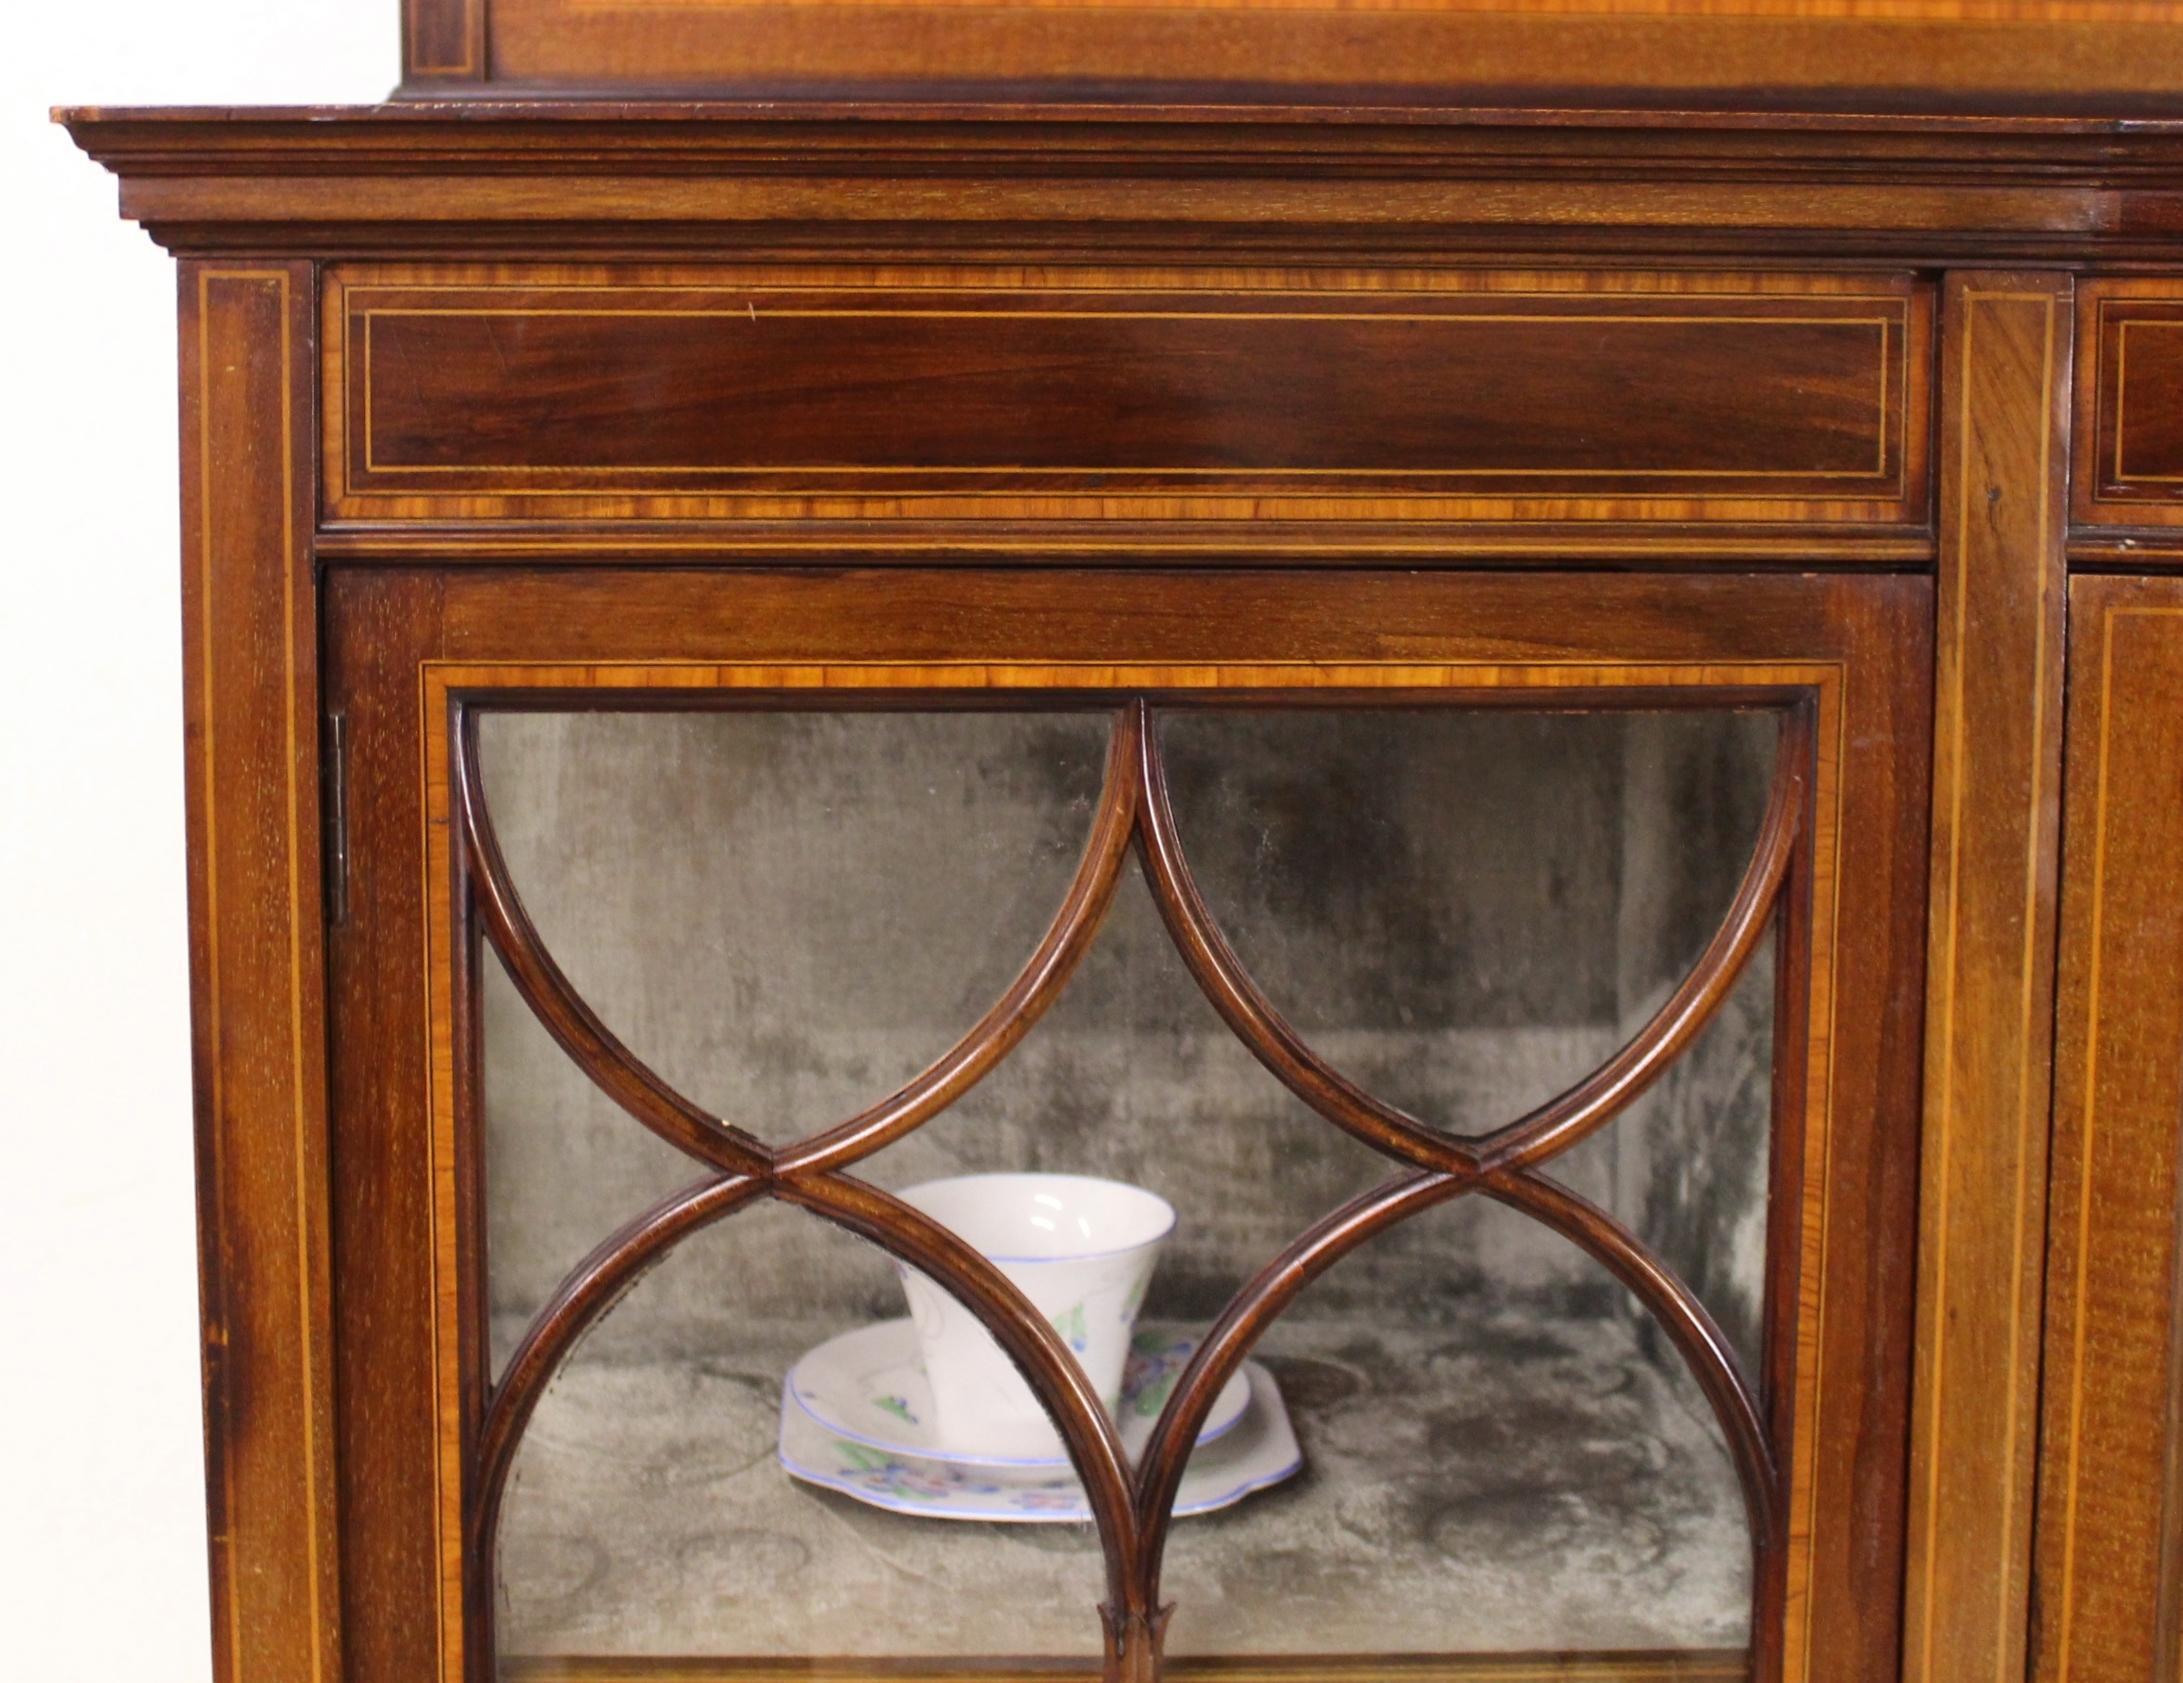 A stunning inlaid mahogany display cabinet from the Edwardian period. Of fine construction in solid mahogany, decorated with satinwood banding, stringing and floral marquetry inlay. Configured with one central , bow-fronted, cupboard door flanked by